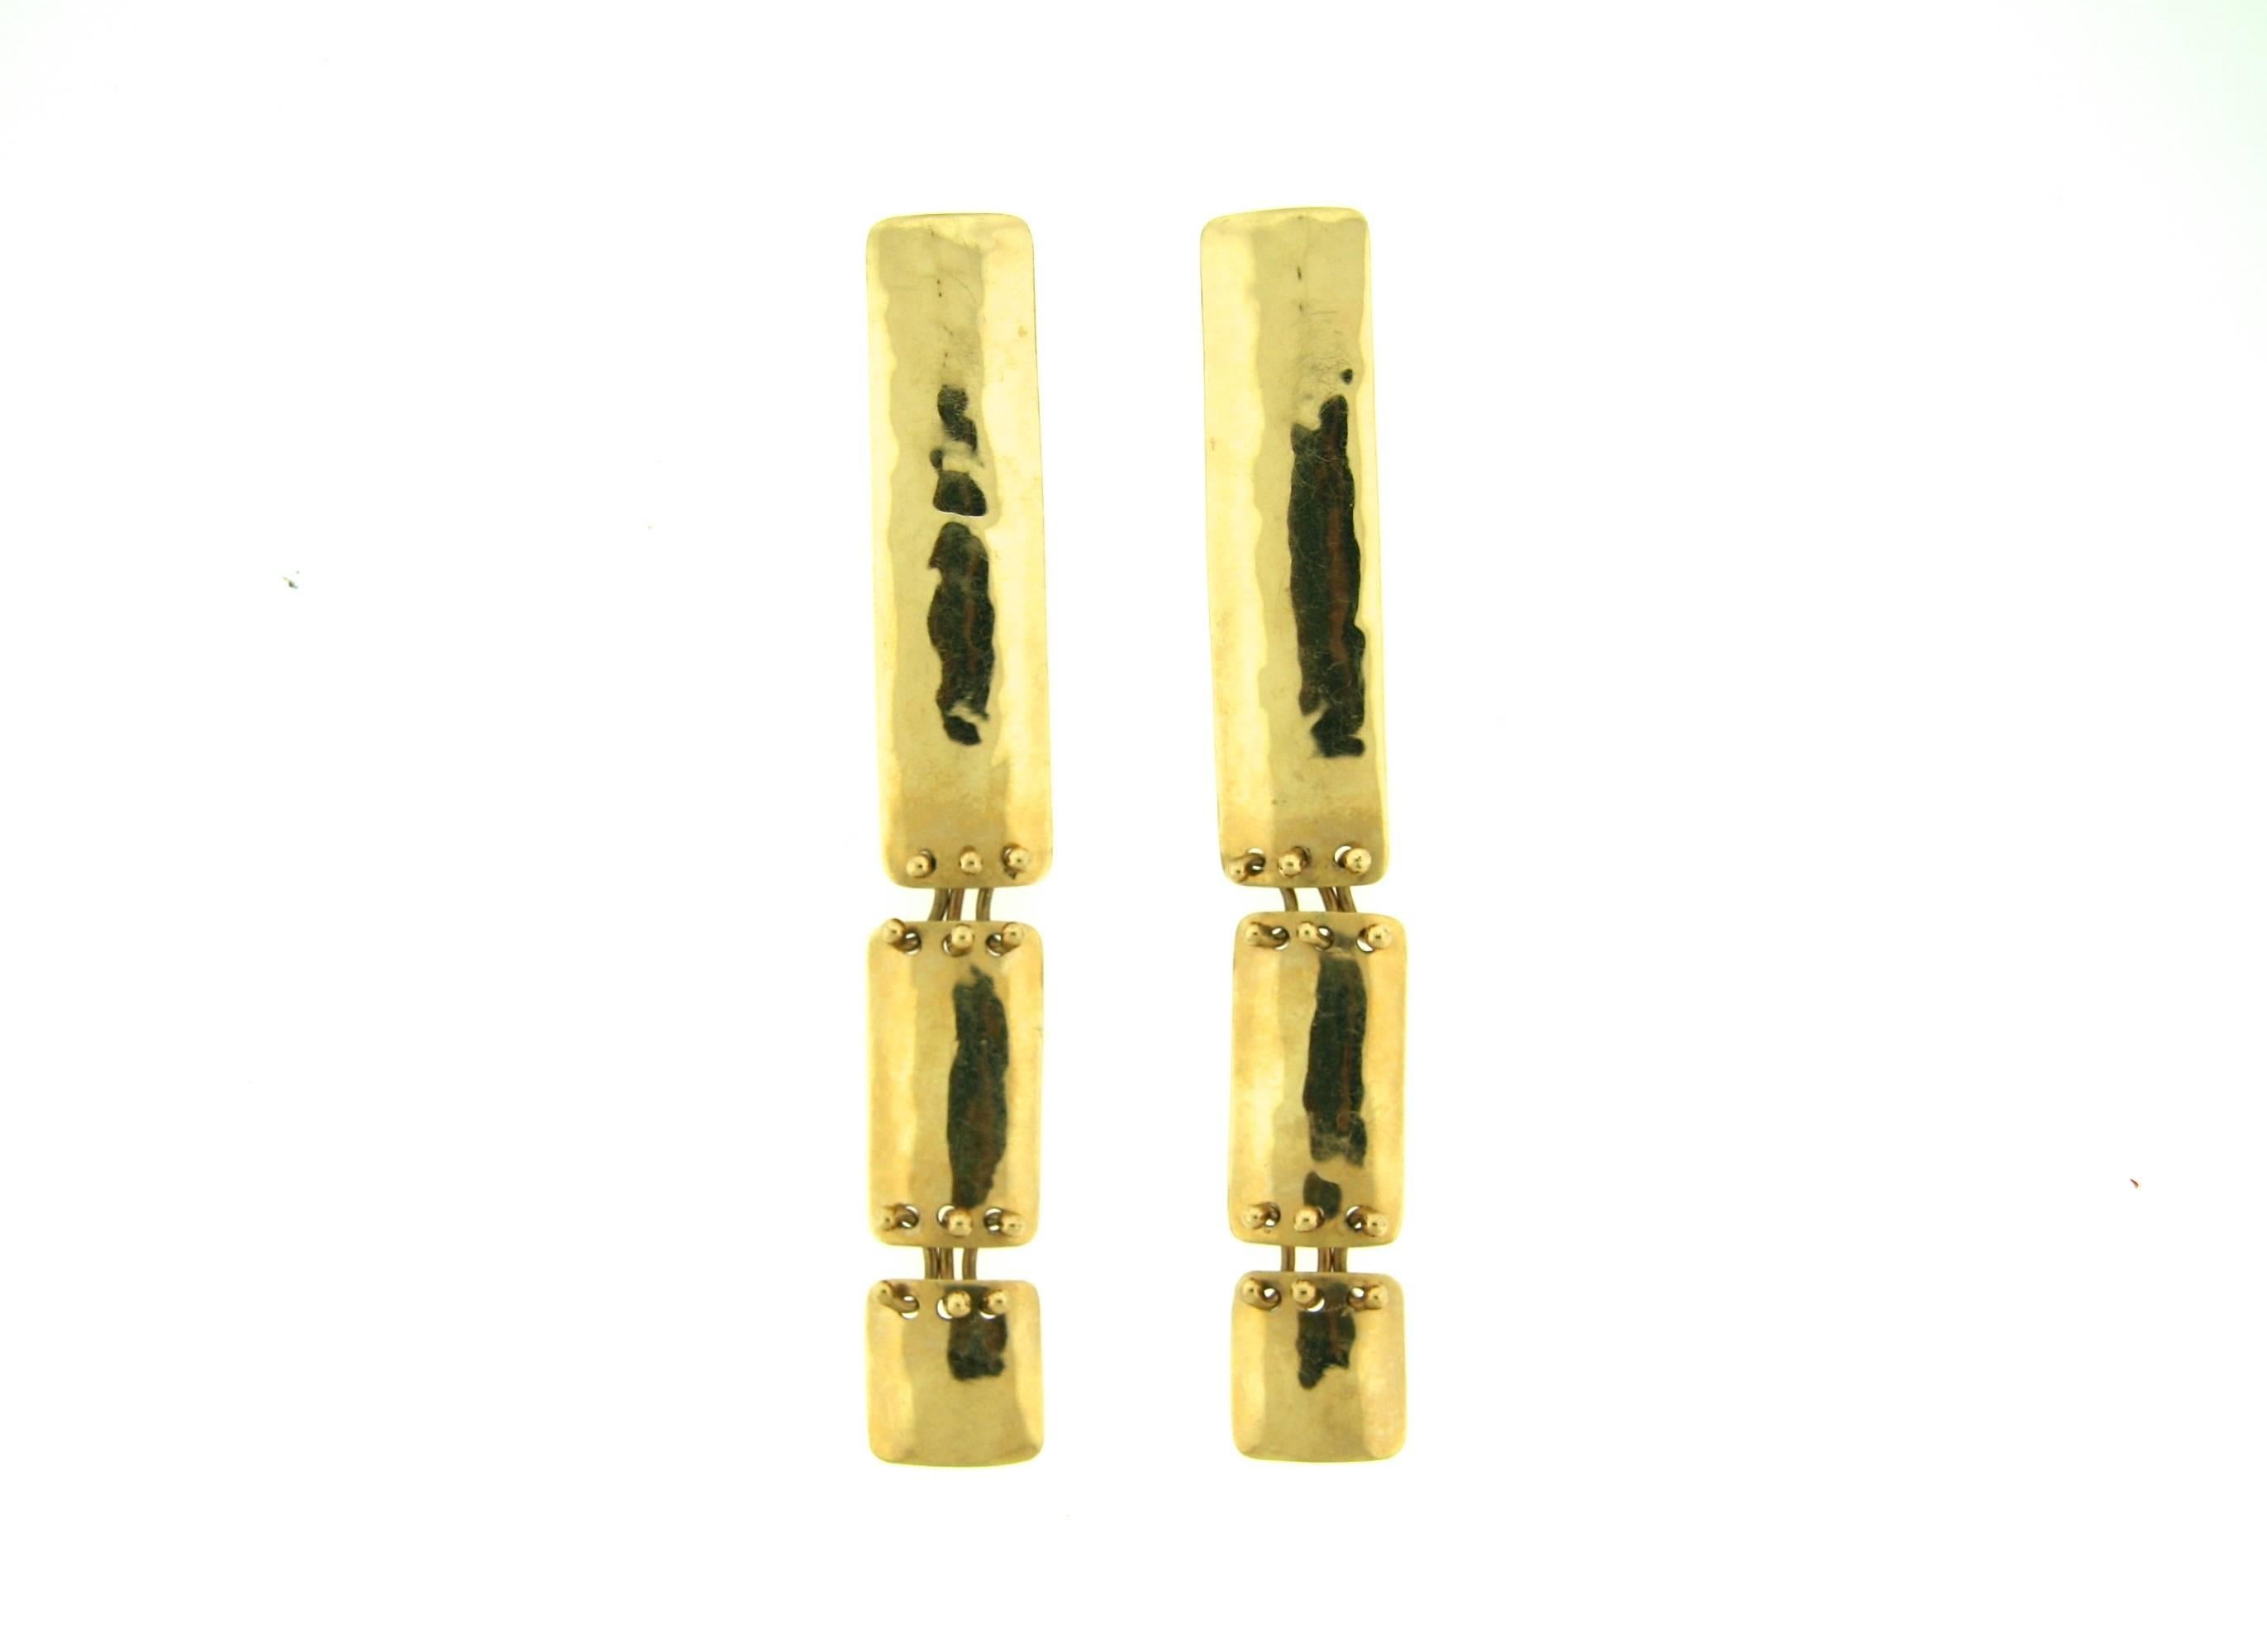 These artistic hammered 14k gold earrings have a modern artistic flair in addition to being lightweight, comfortable and articulated for swing and movement. They are 3.75